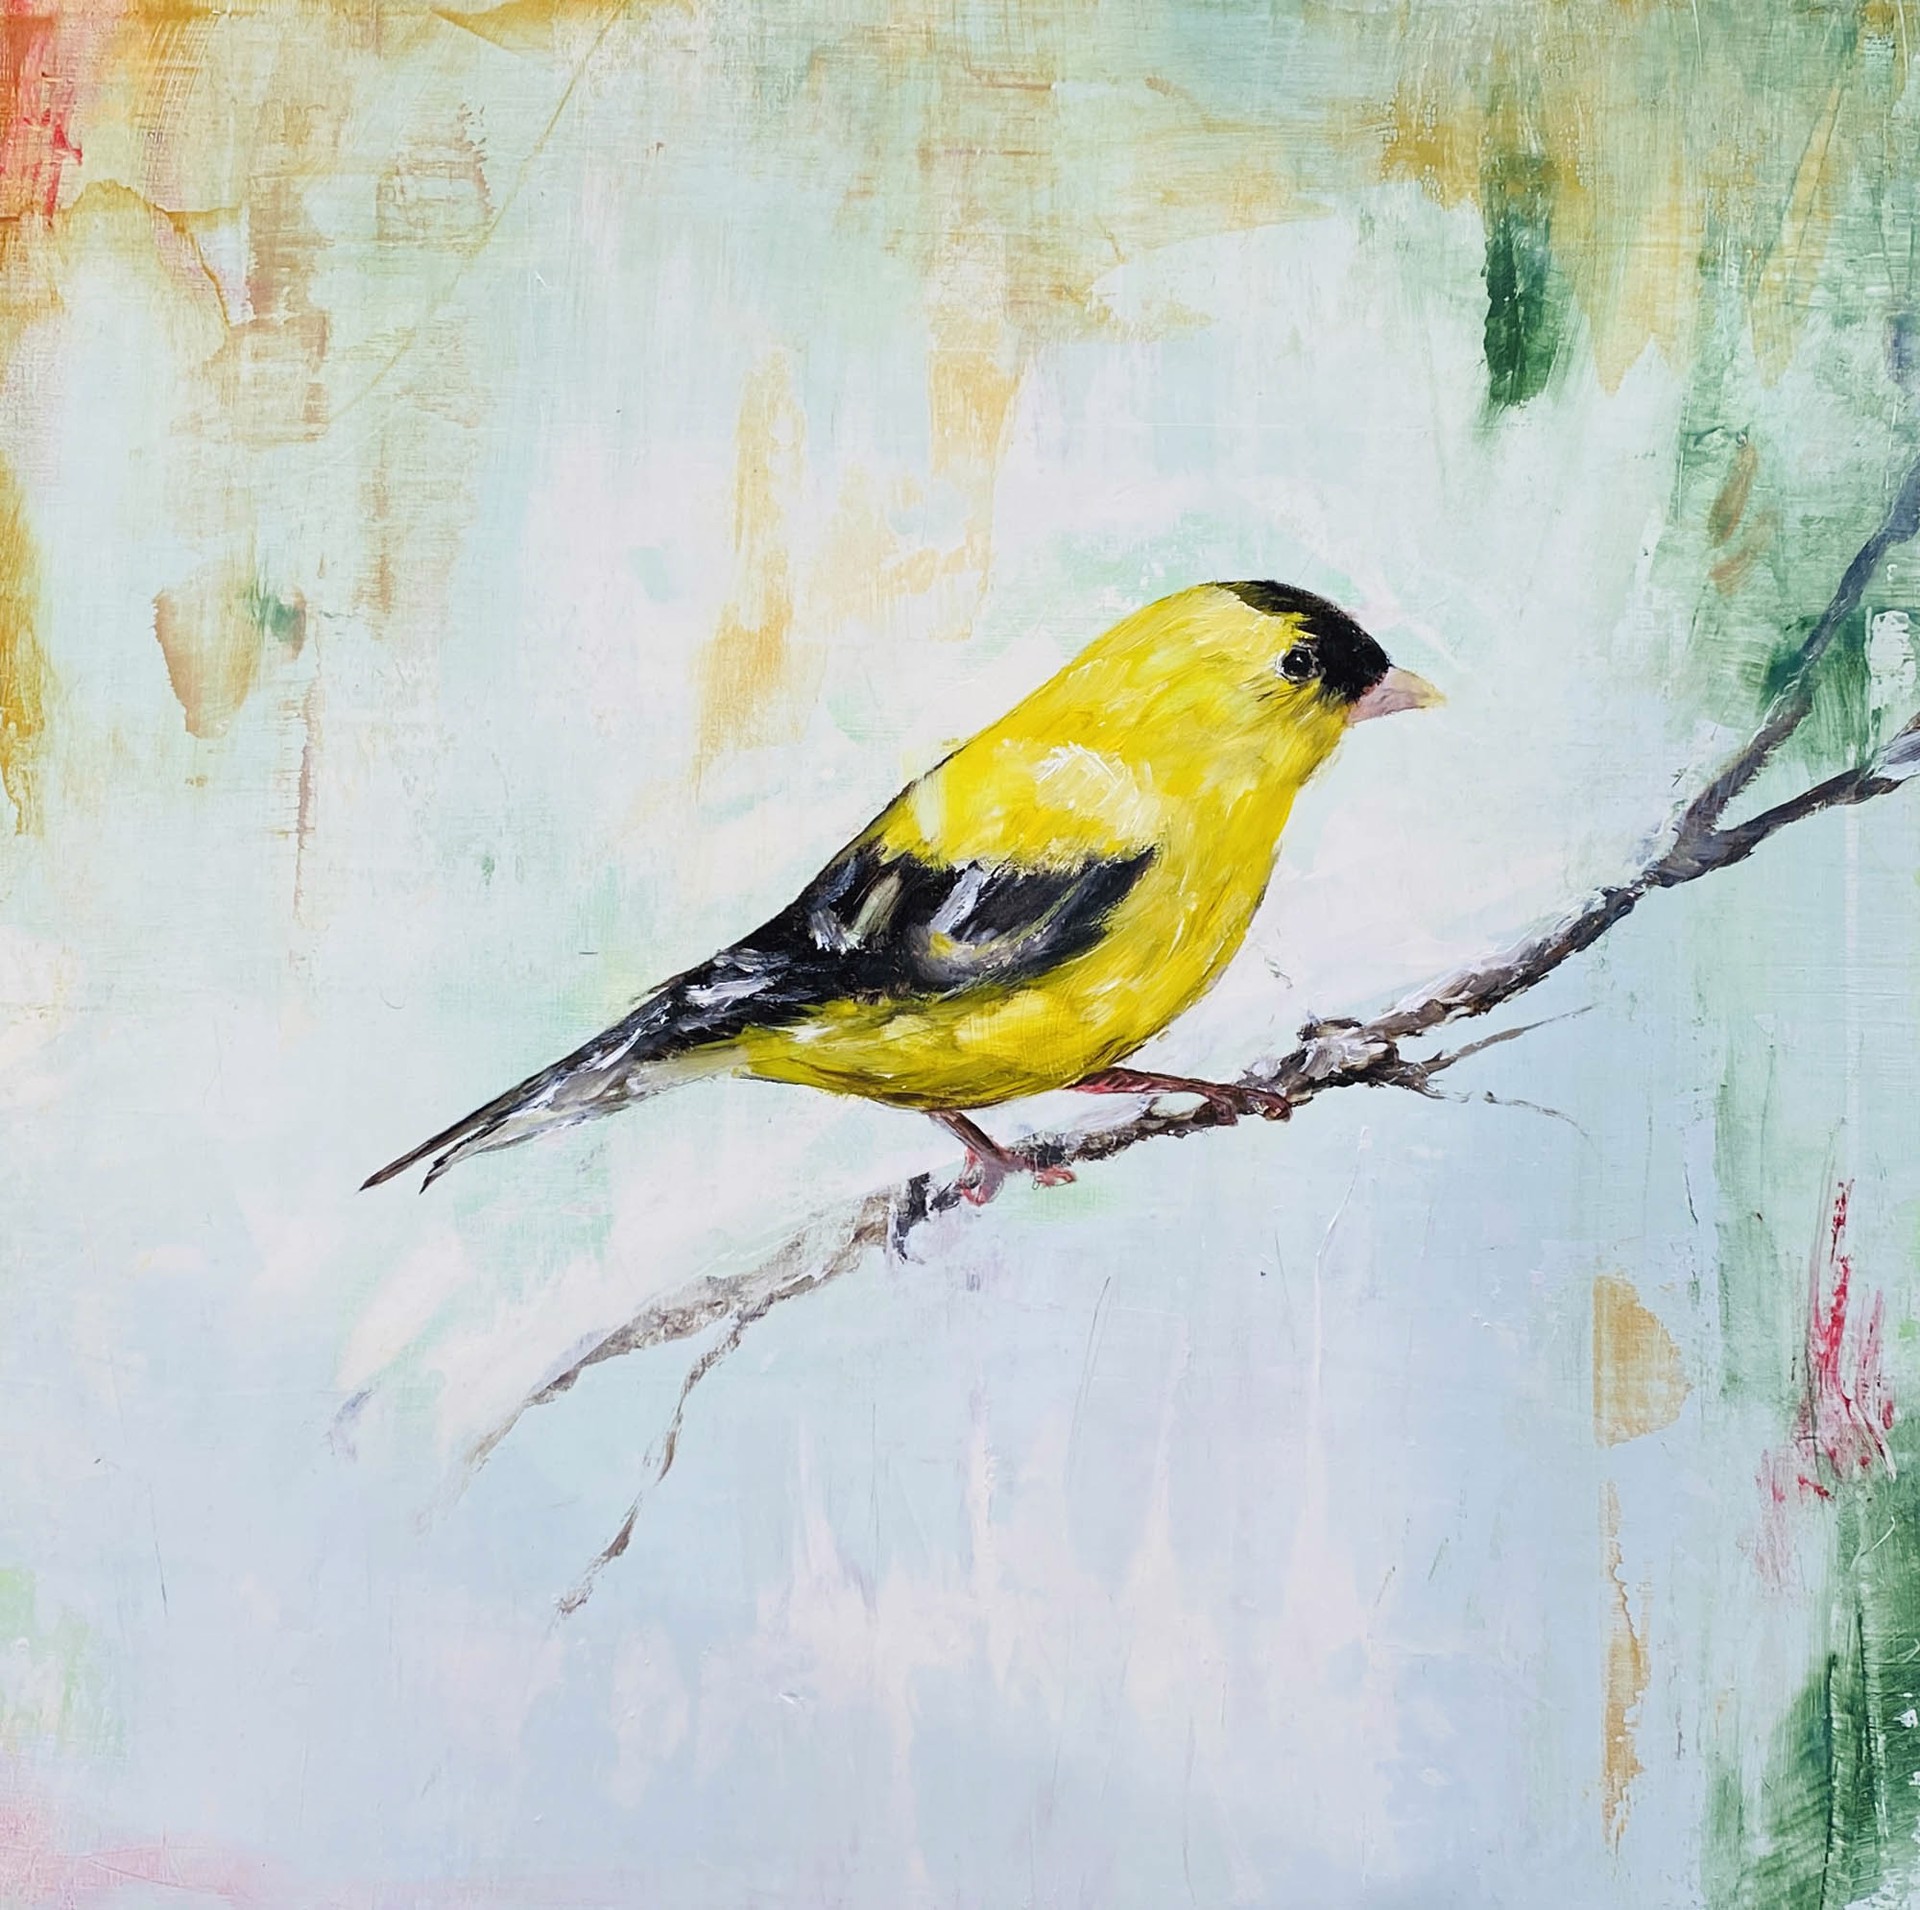 Original Oil Painting Featuring A Gold Finch On A Branch Over Abstract Blue Background